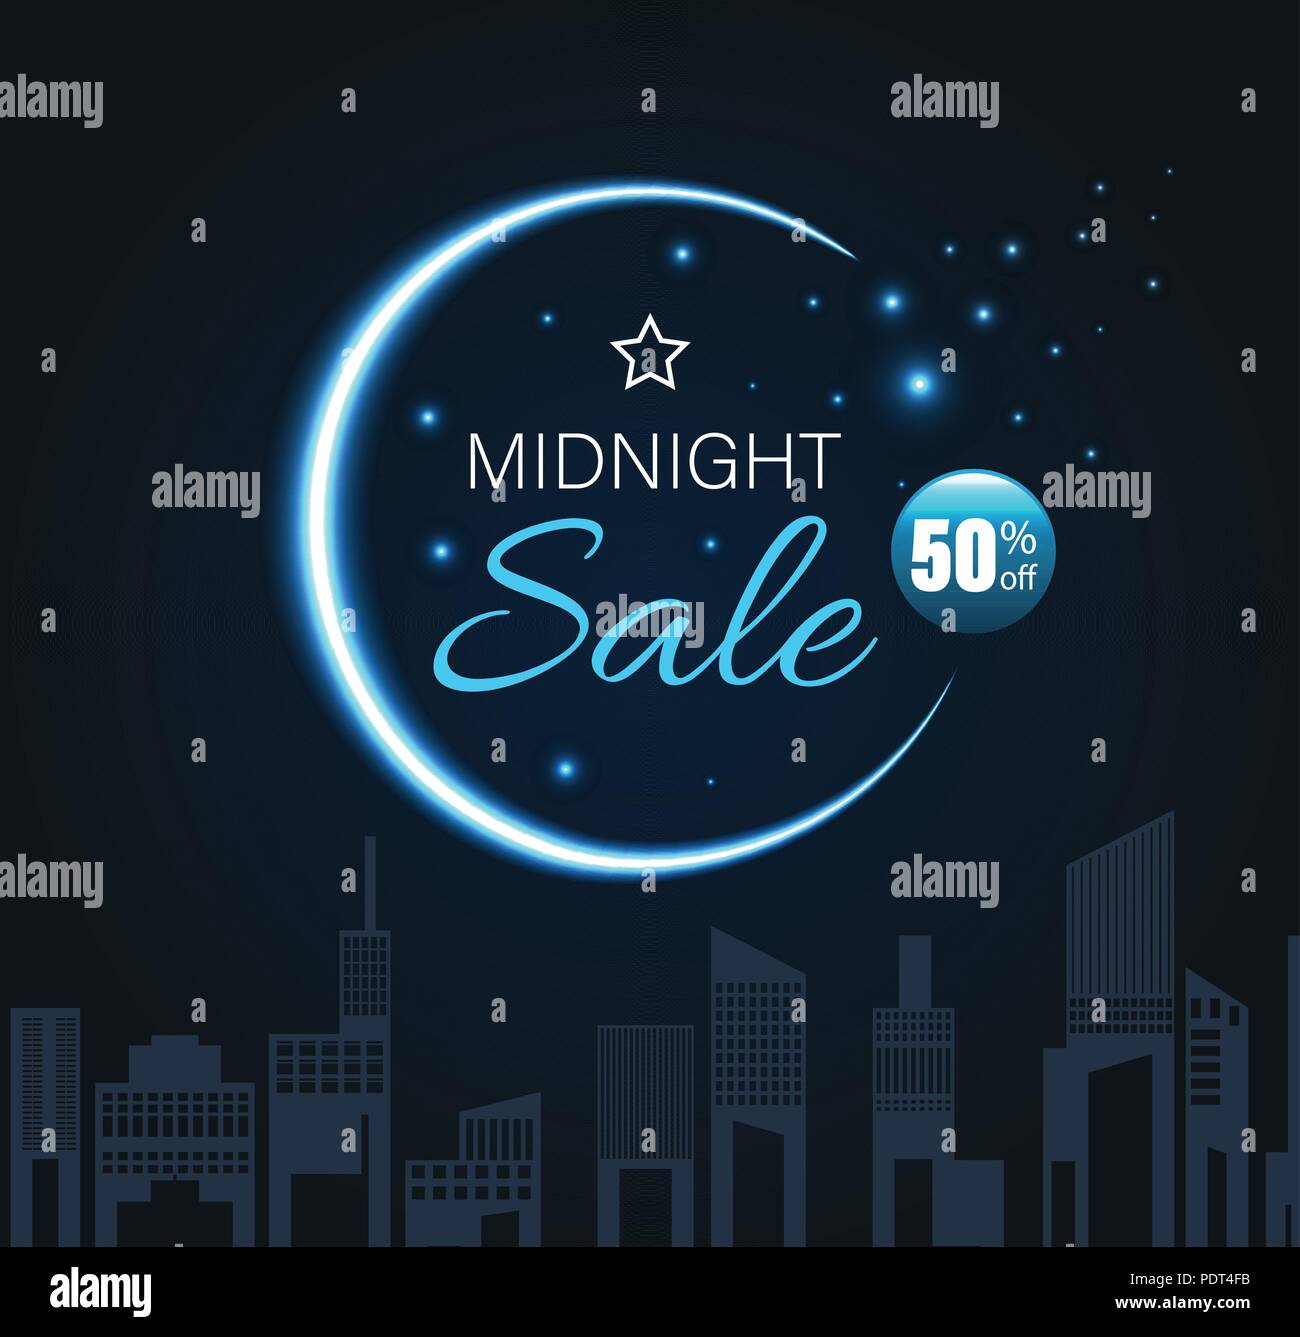 Midnight sale with crescent moon and city night style. Vector illustration. Stock Vector